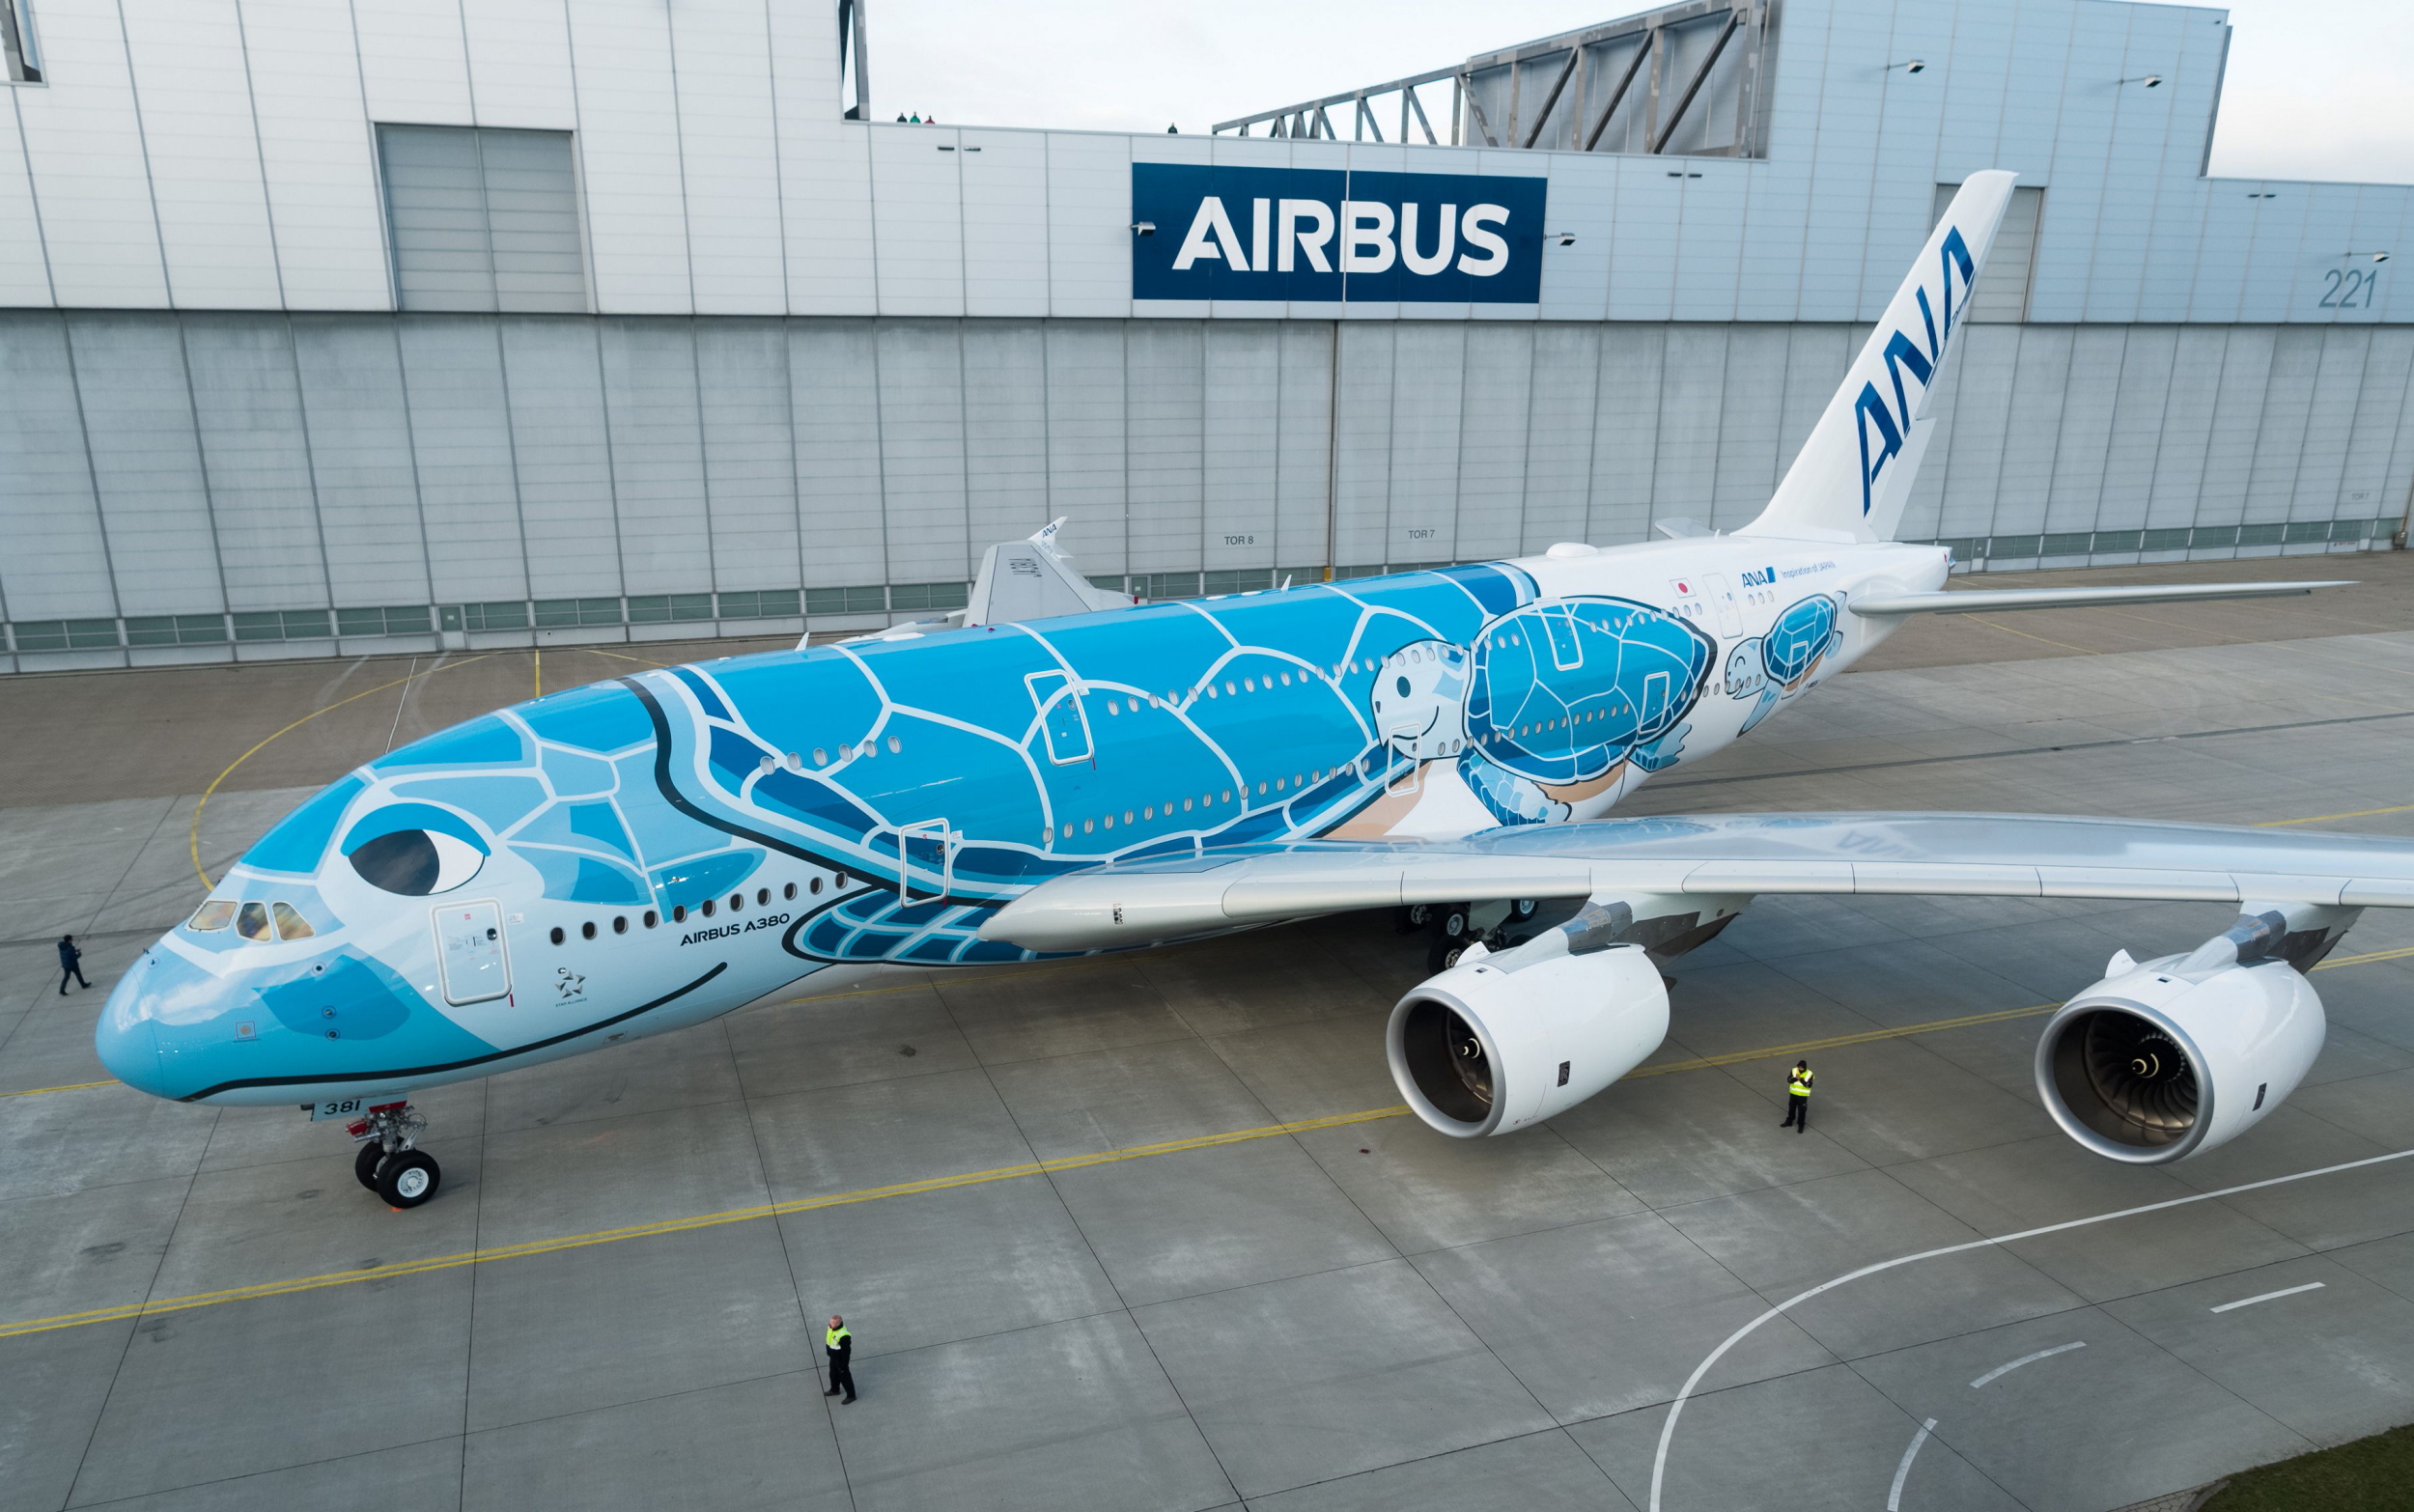 ANA's first A380 rolls out with Hawaiian green sea turtle livery 